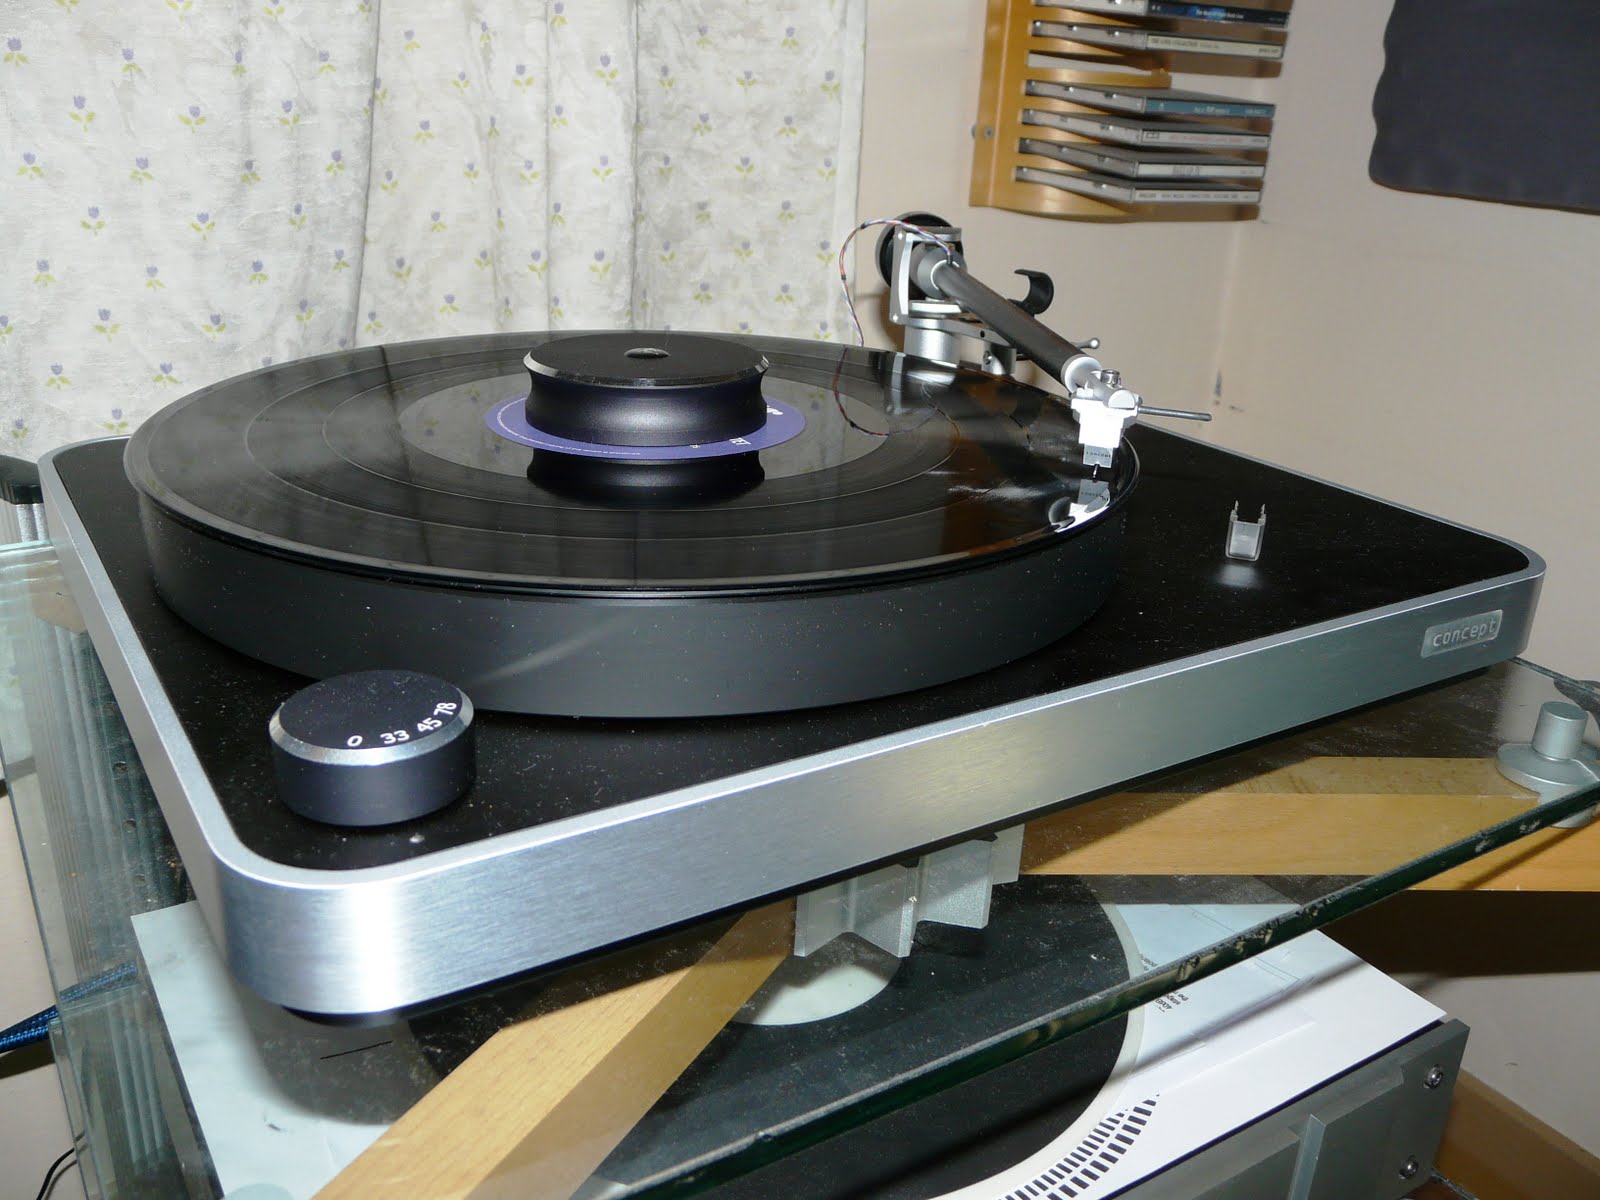 HiFi Unlimited: Loving Music. Clearaudio Concept Turntable.